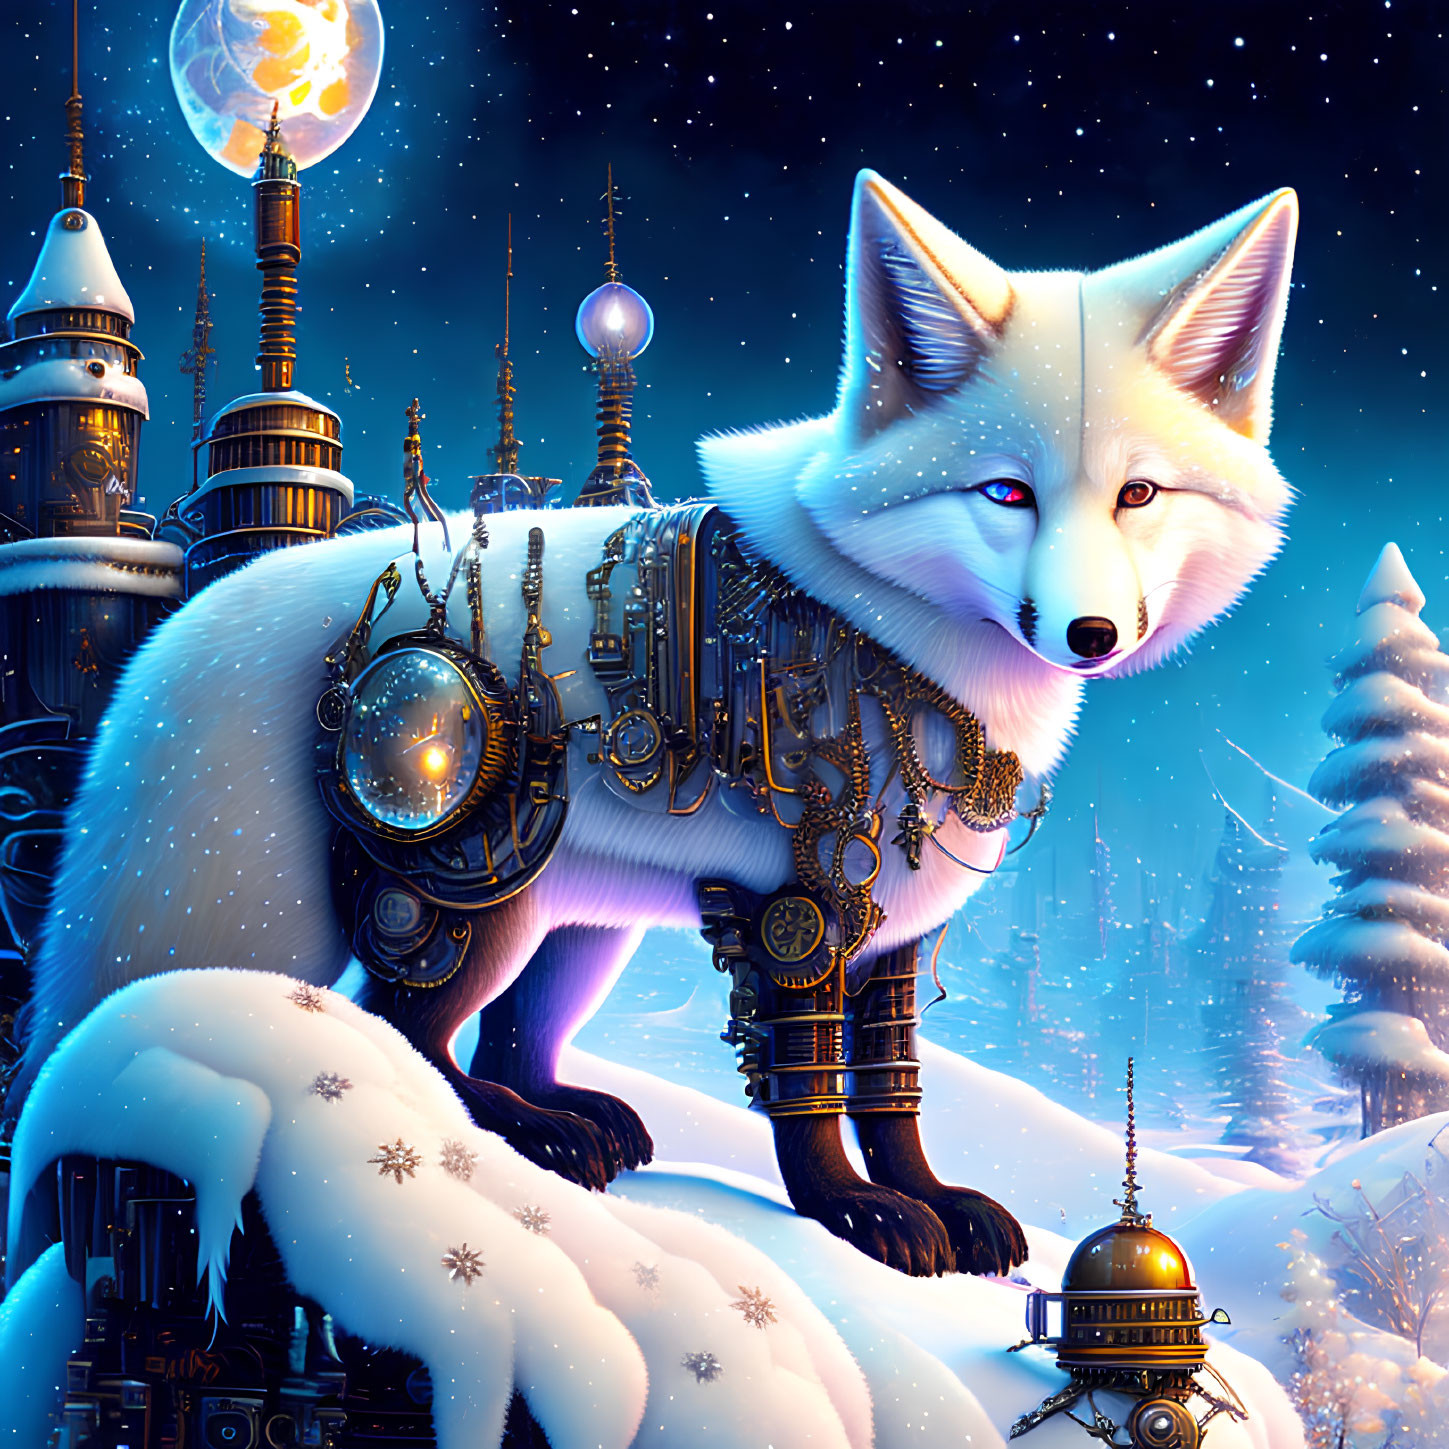 Cybernetic white fox in snowy futuristic cityscape with glowing buildings